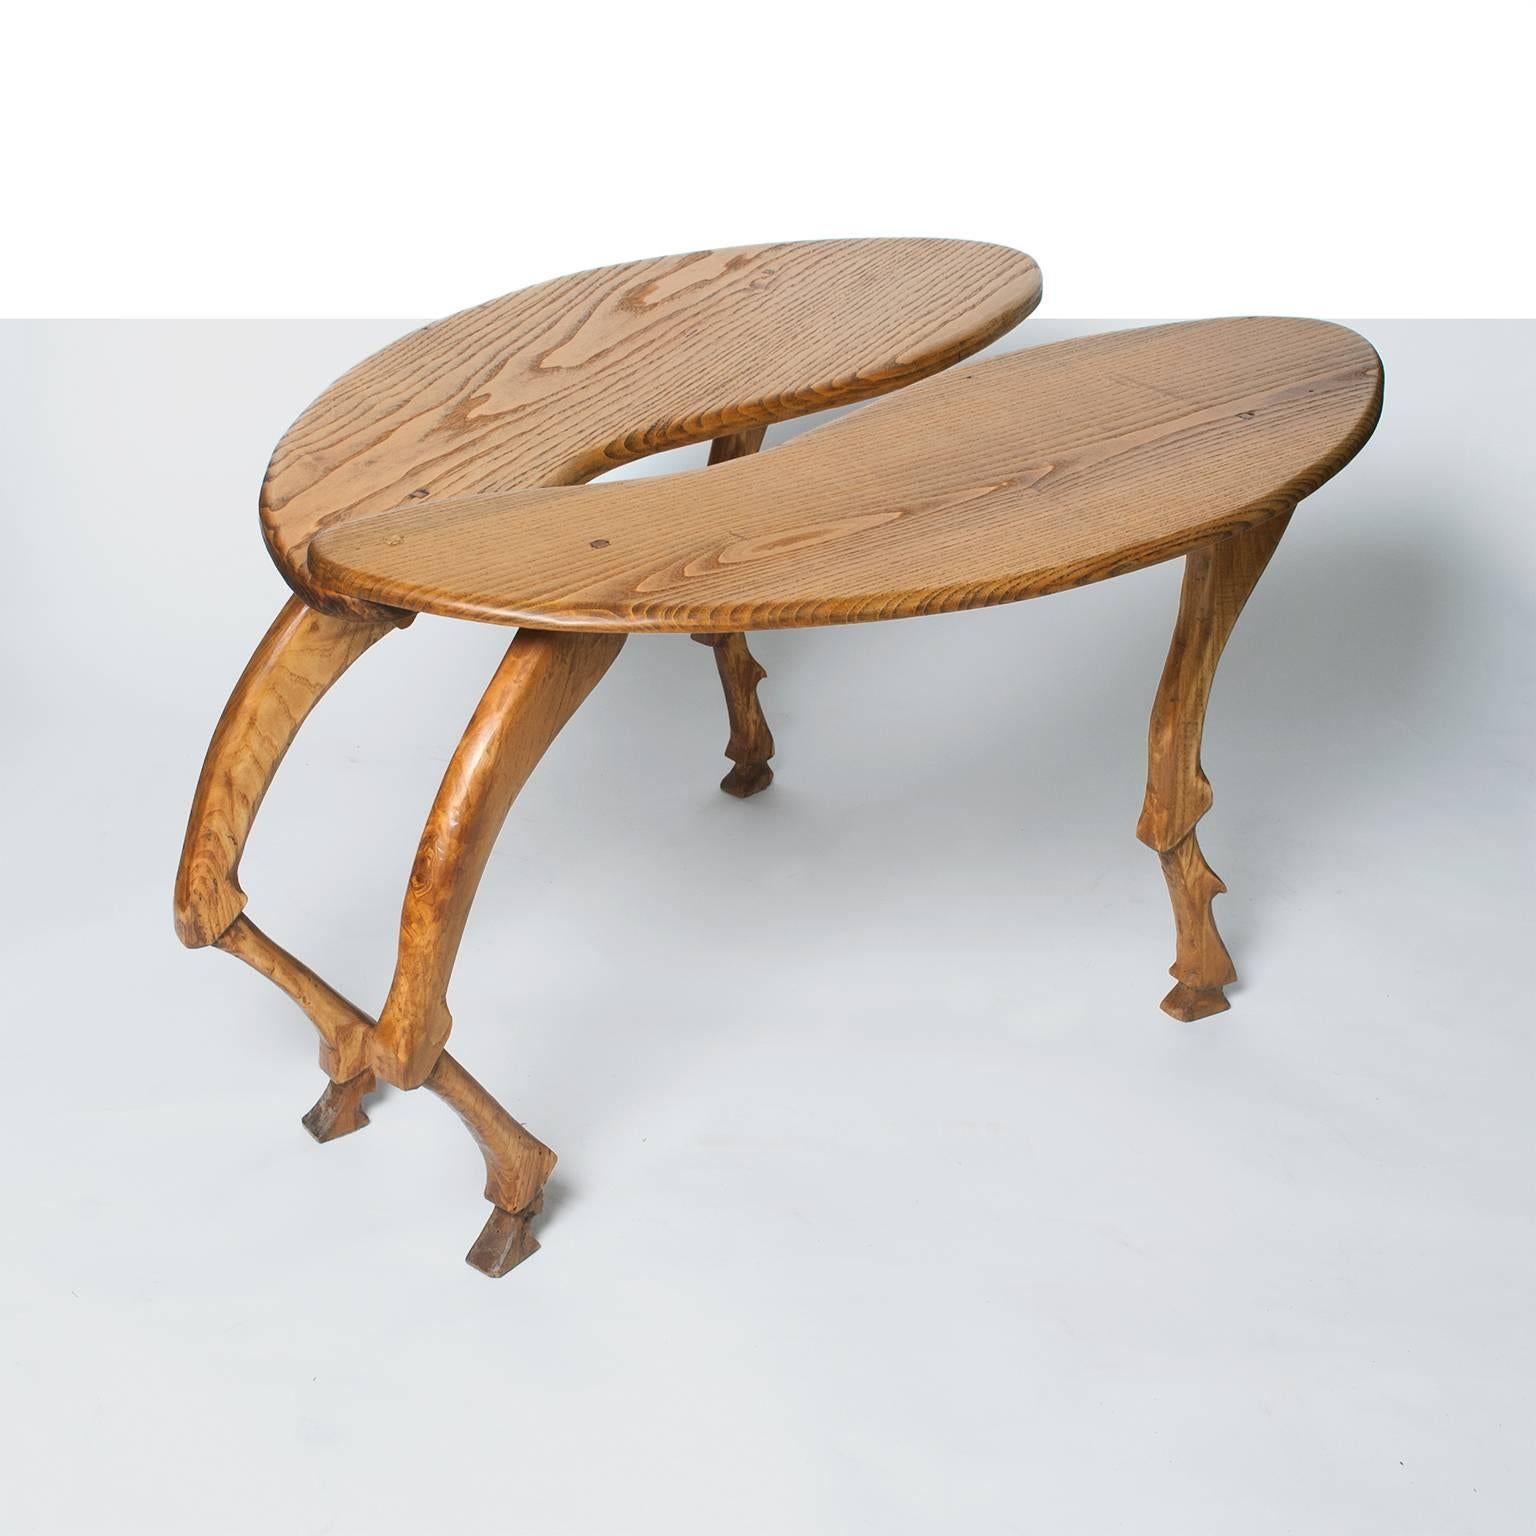 20th Century Scandinavian Modern Hand-Carved Surrealist Adjustable Insect Table